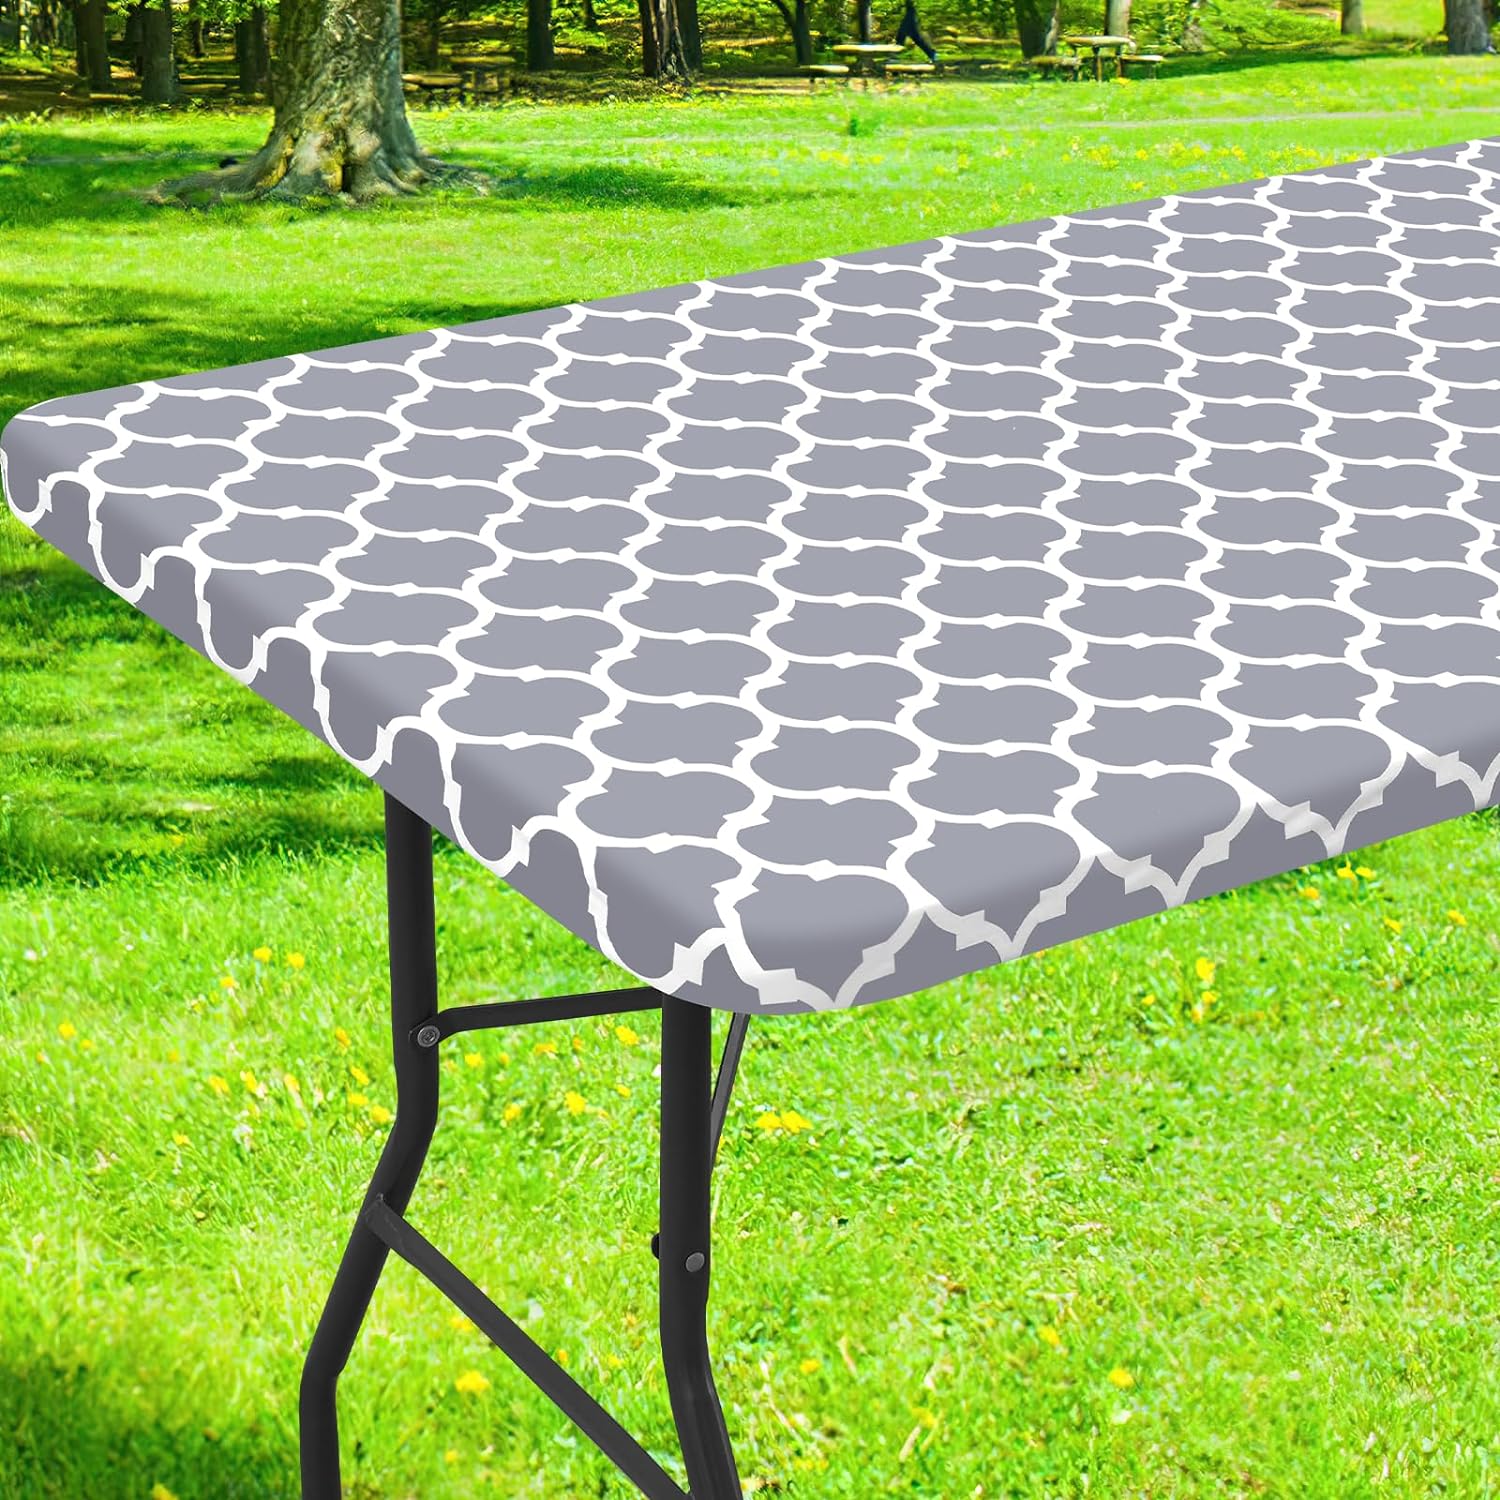 smiry Rectangle Picnic Tablecloth, Waterproof Elastic Fitted Table Covers for 6 Foot Tables, Wipeable Flannel Backed Vinyl Tablecloths for Camping, Indoor, Outdoor (Grey Morocco, 30×72 Inches)